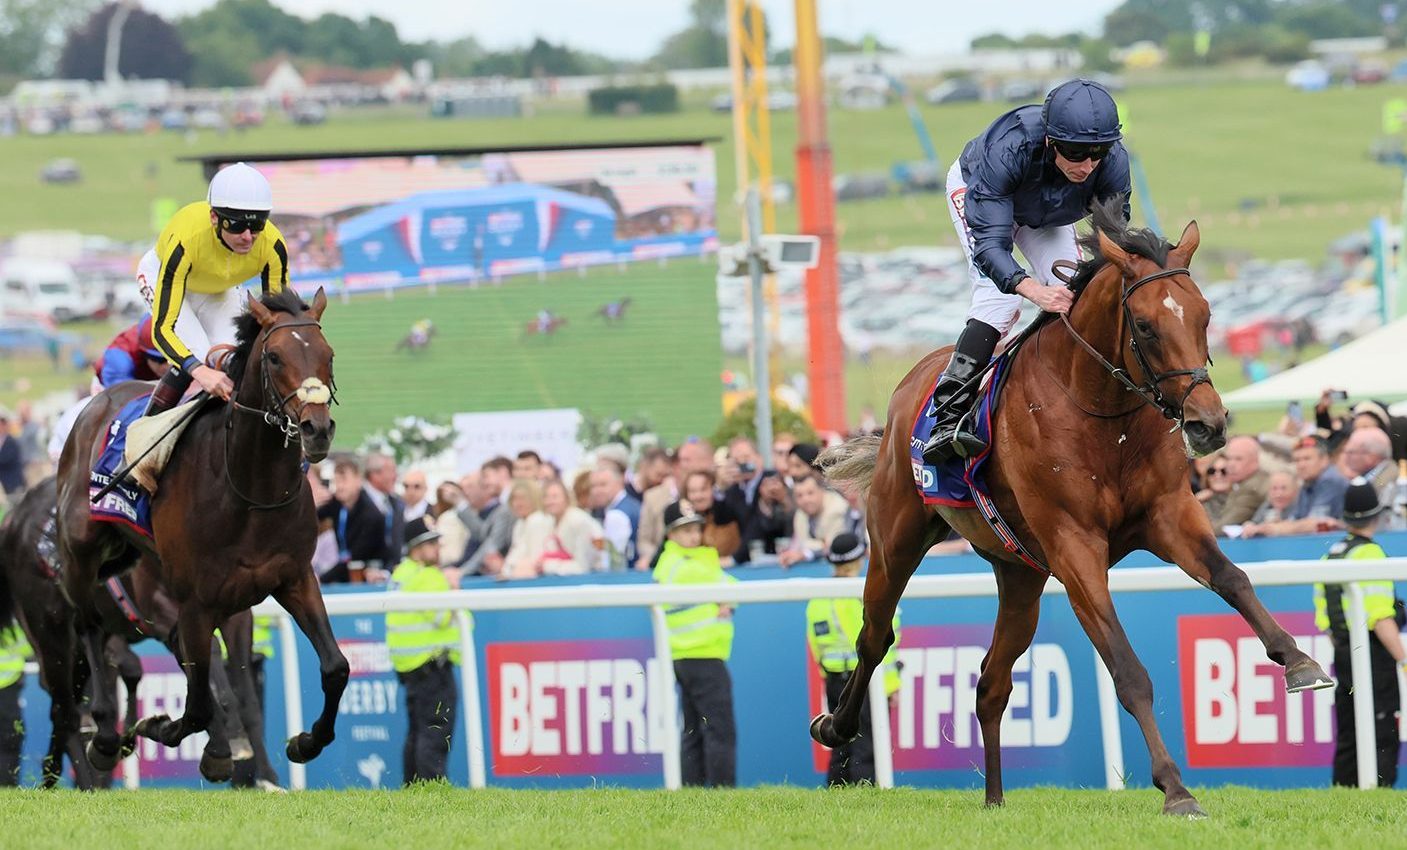 Aidan O’Brien’s City Of Troy is heading for the Gr1 Coral-Eclipse in July